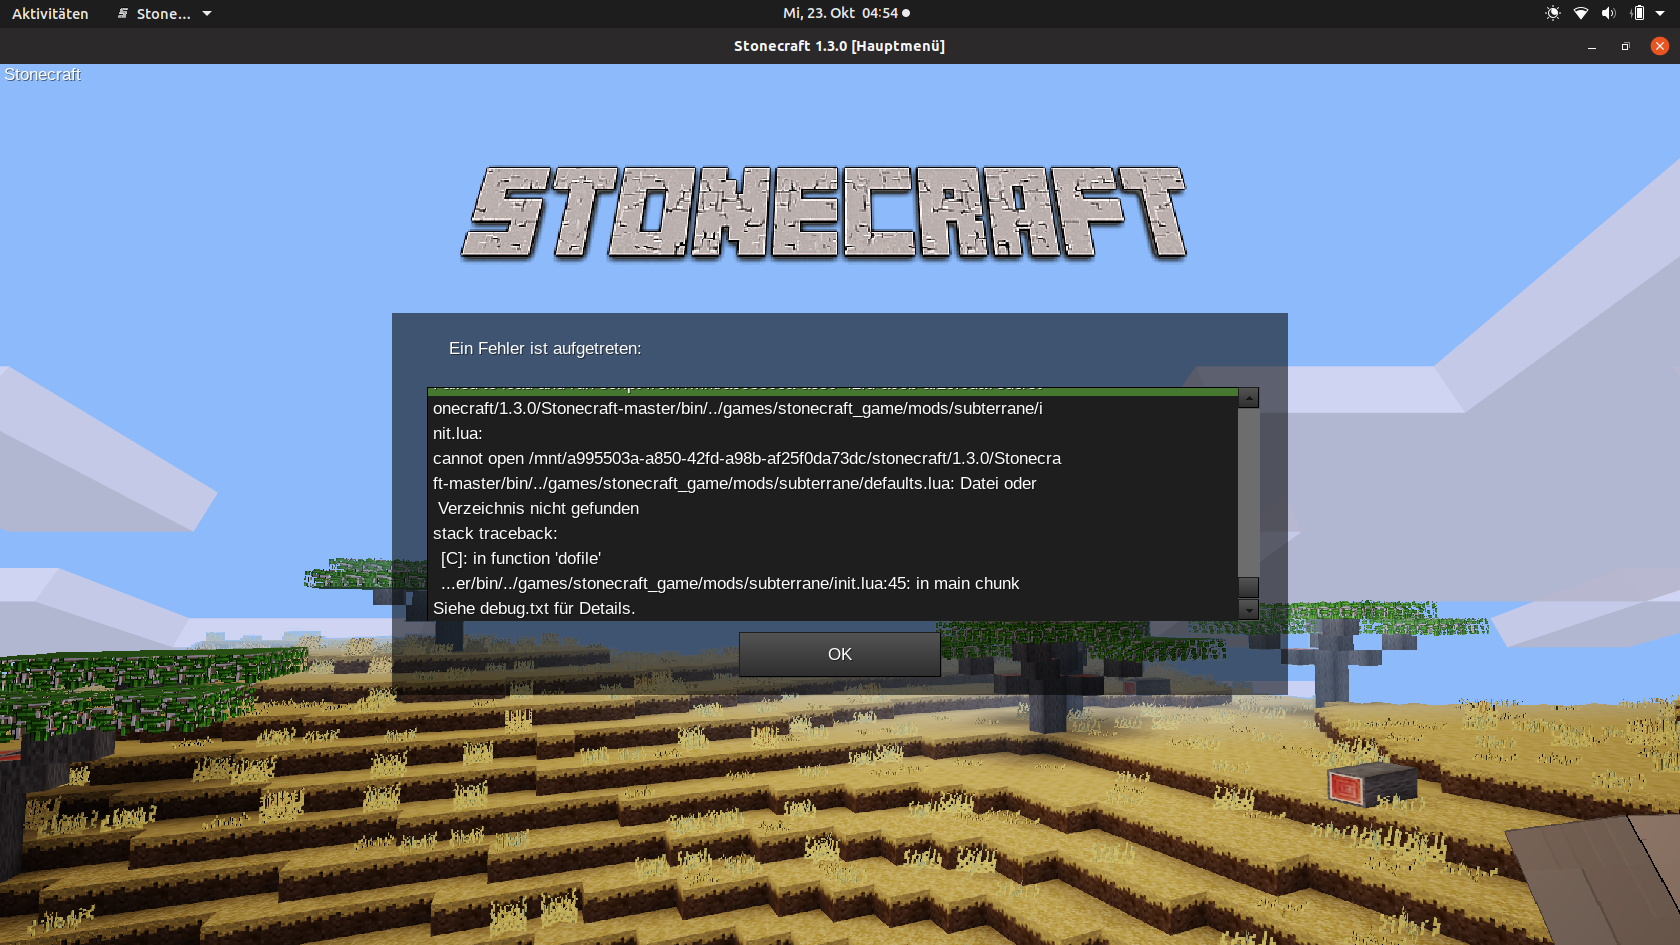 Comments 160 To 121 Of 195 Stonecraft By Mrcerealguy